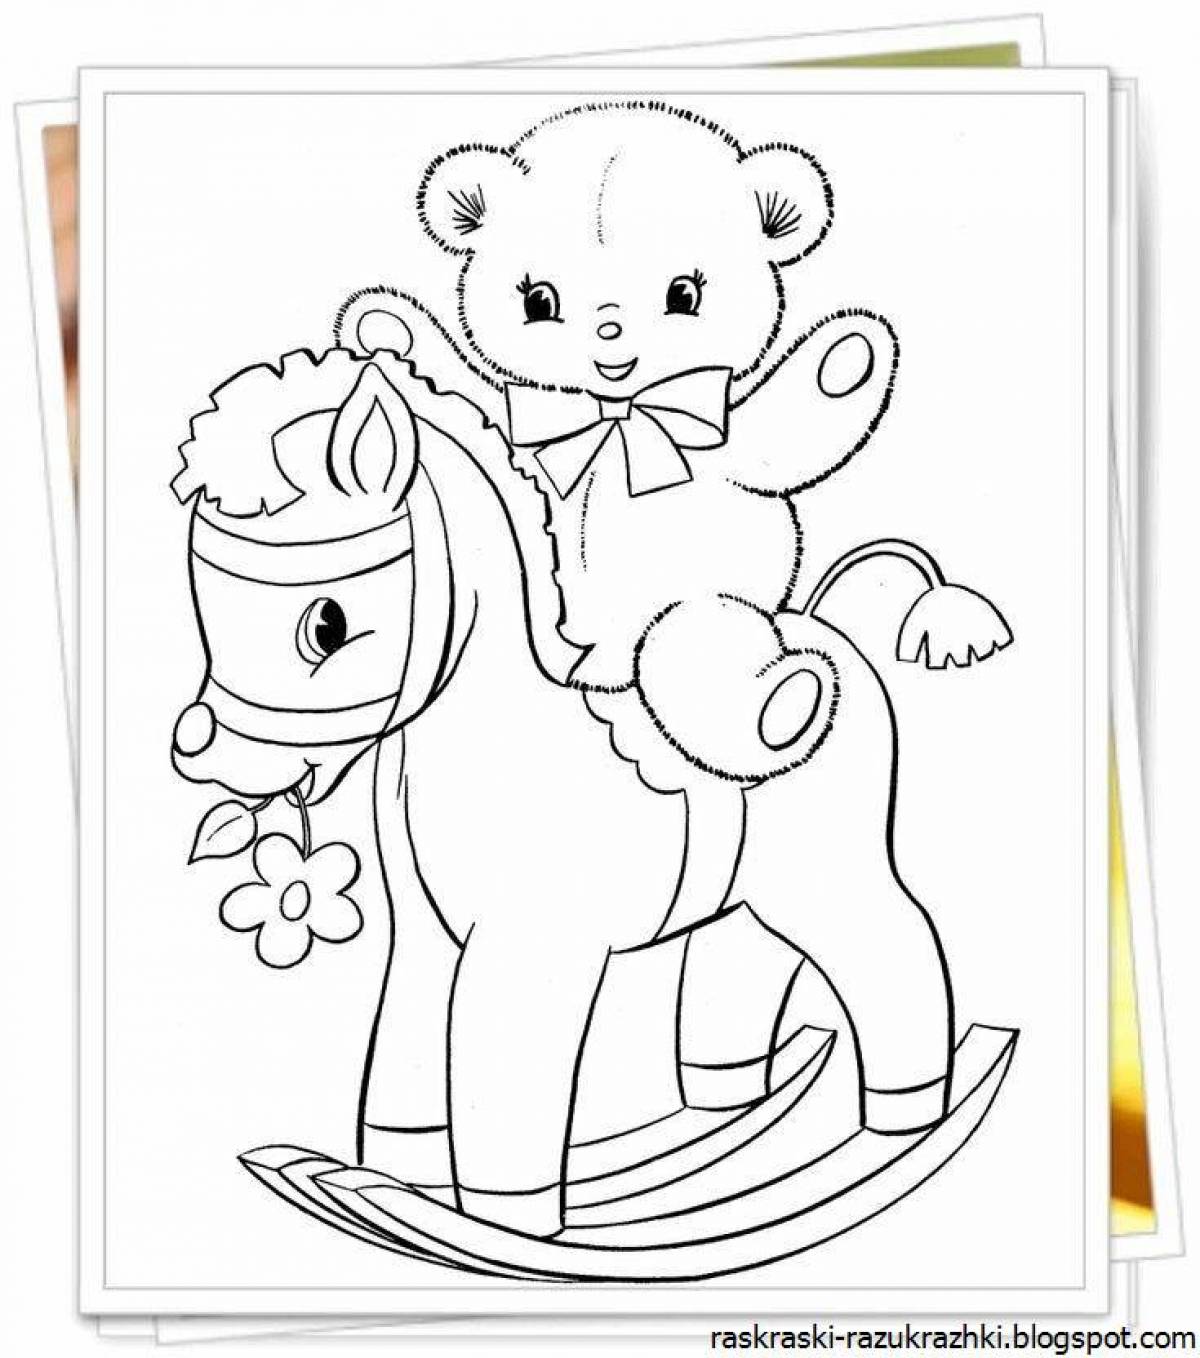 Coloring book for girls 4 years old